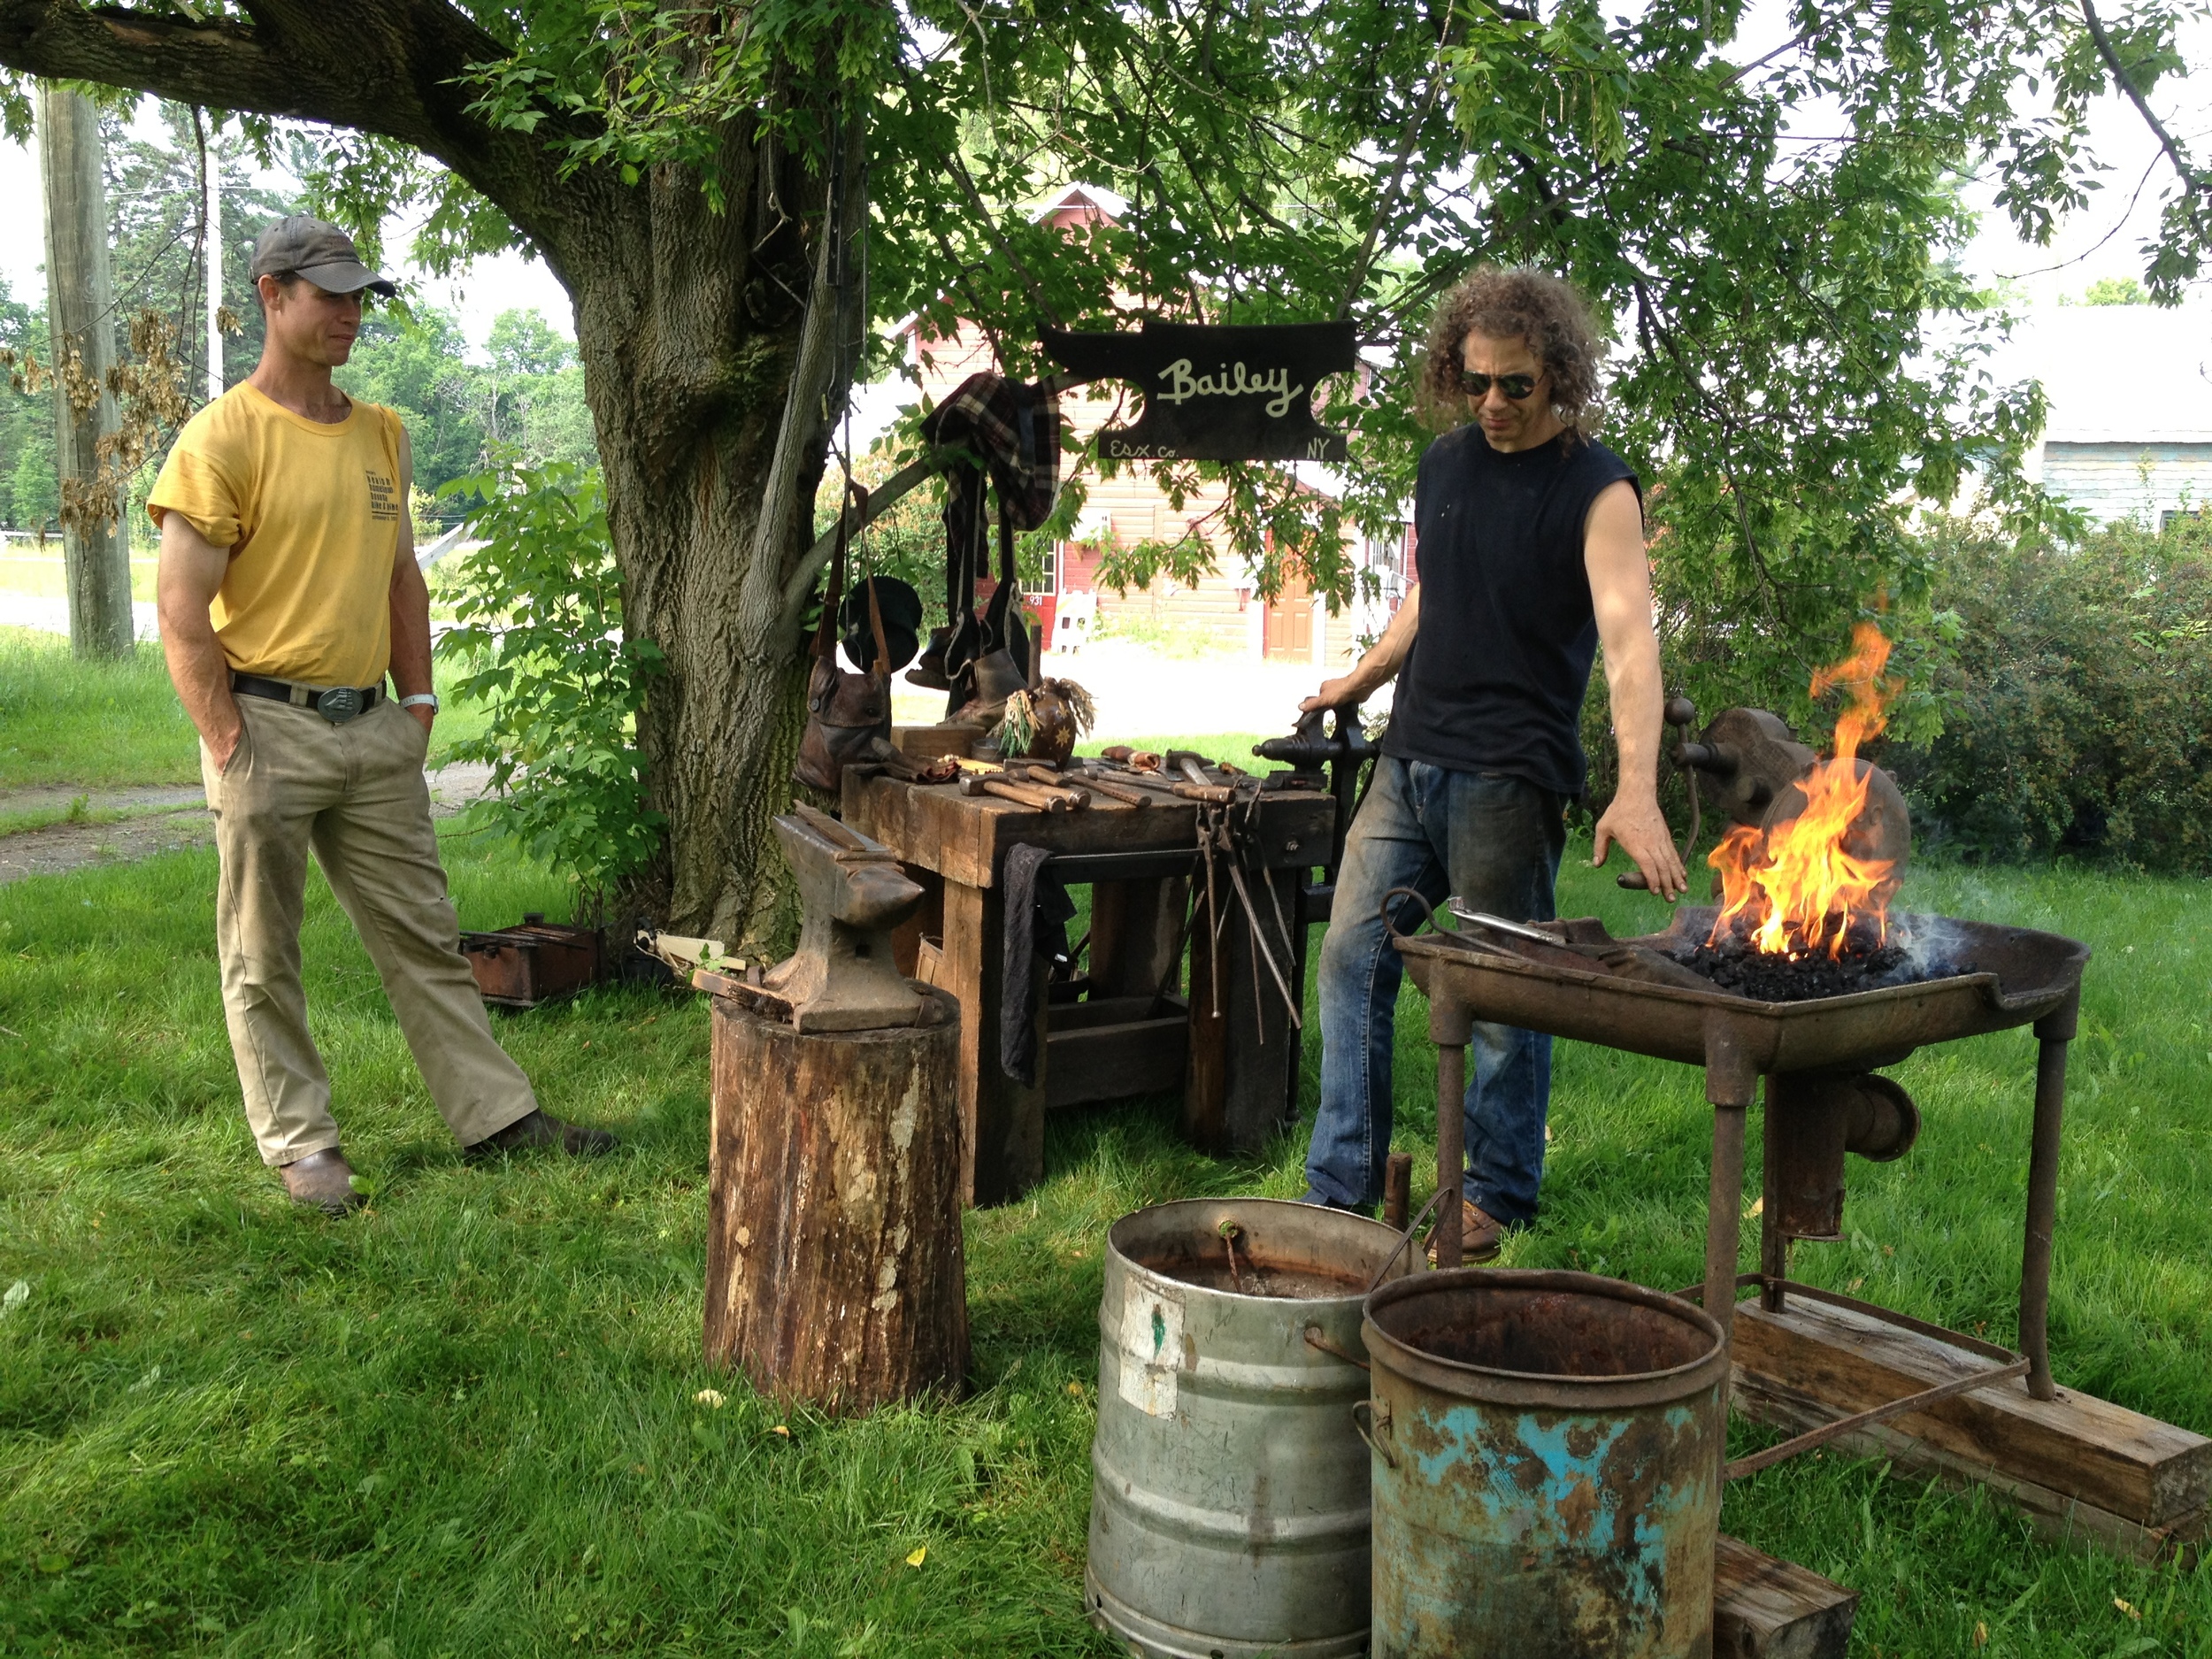  Sated, we split up for some workshops - I chose a blacksmithing demo from Russ, the local blacksmith.  